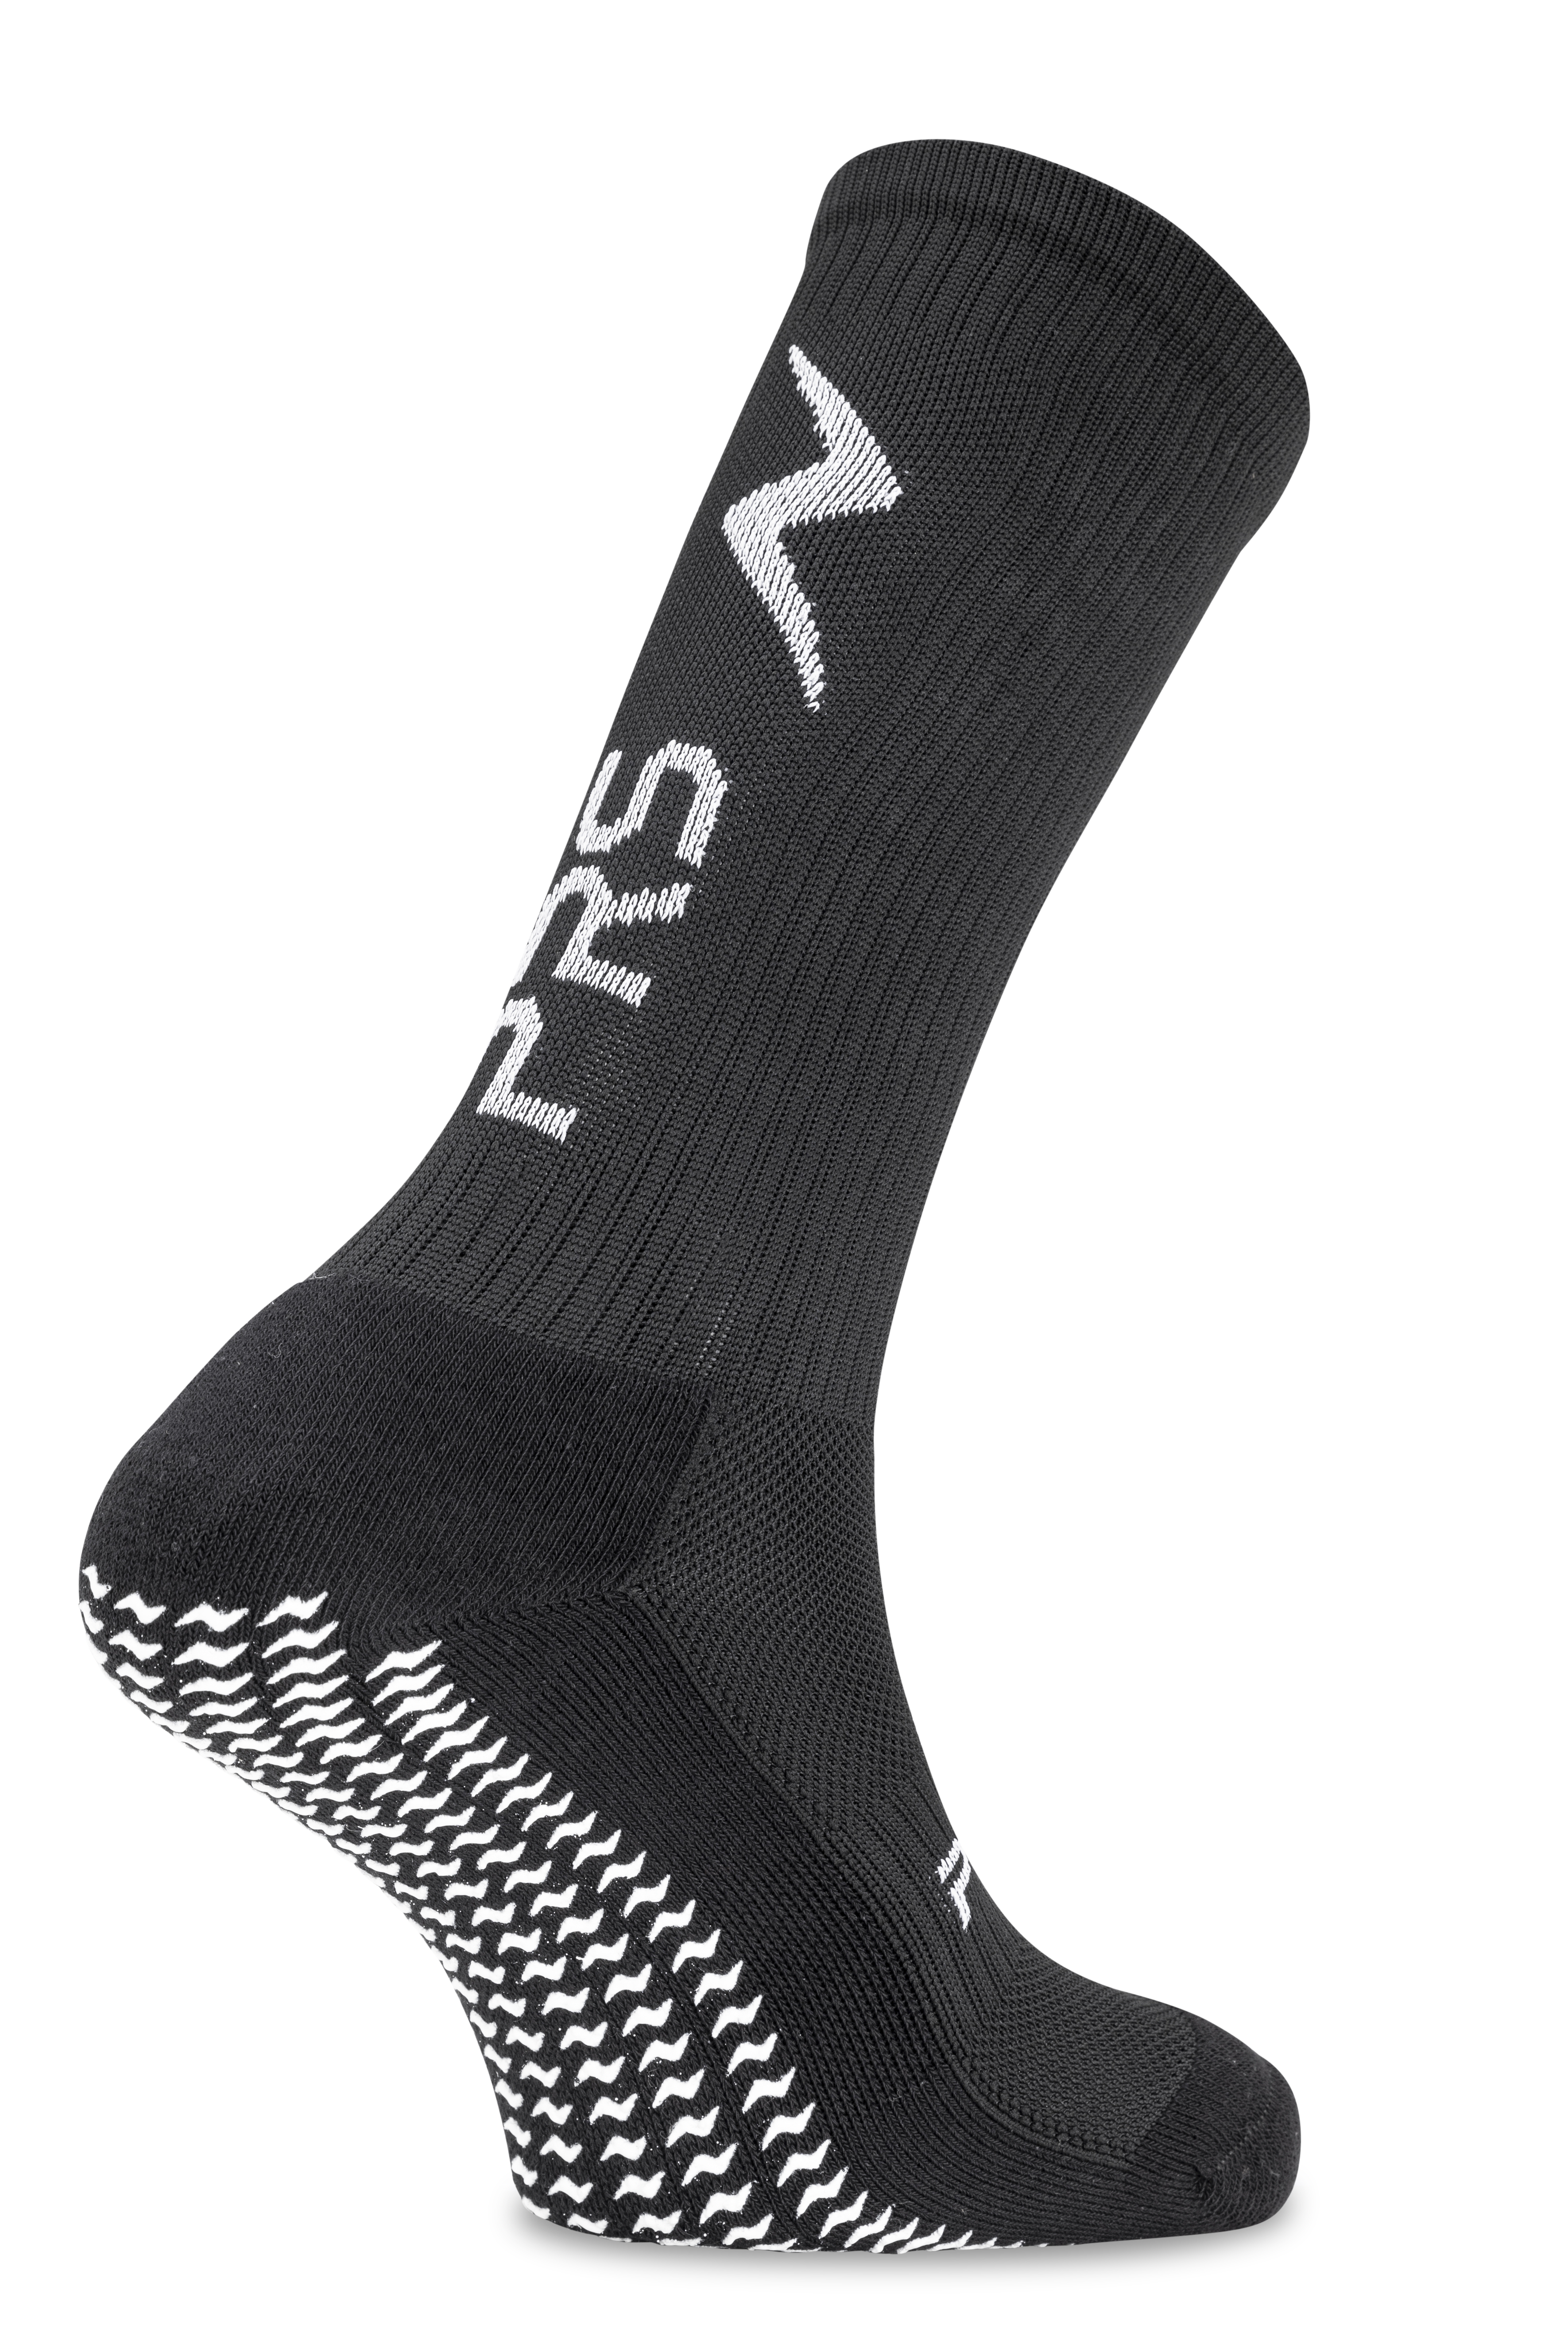 Cotton Training Sock for Men | Pack of 2 Pairs | PRS PRO 09